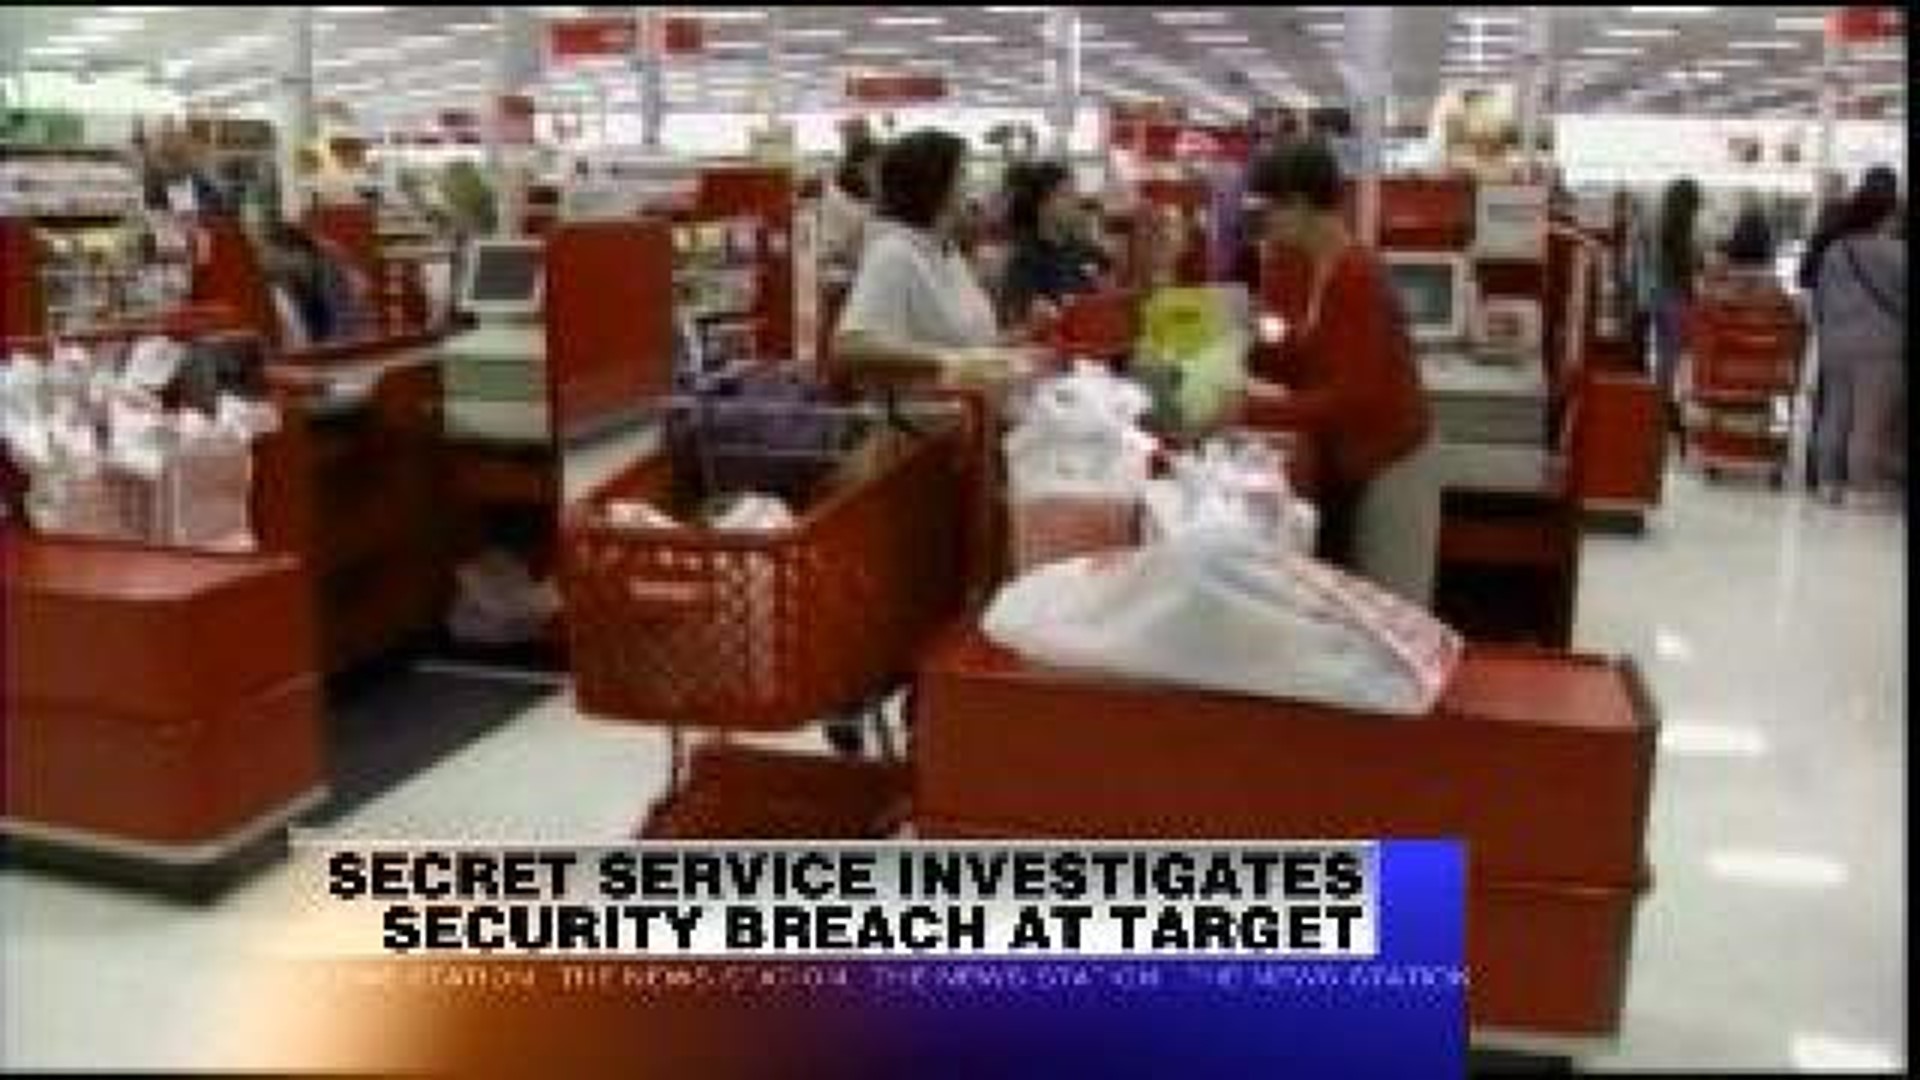 Target Customer Credit Cards Compromised